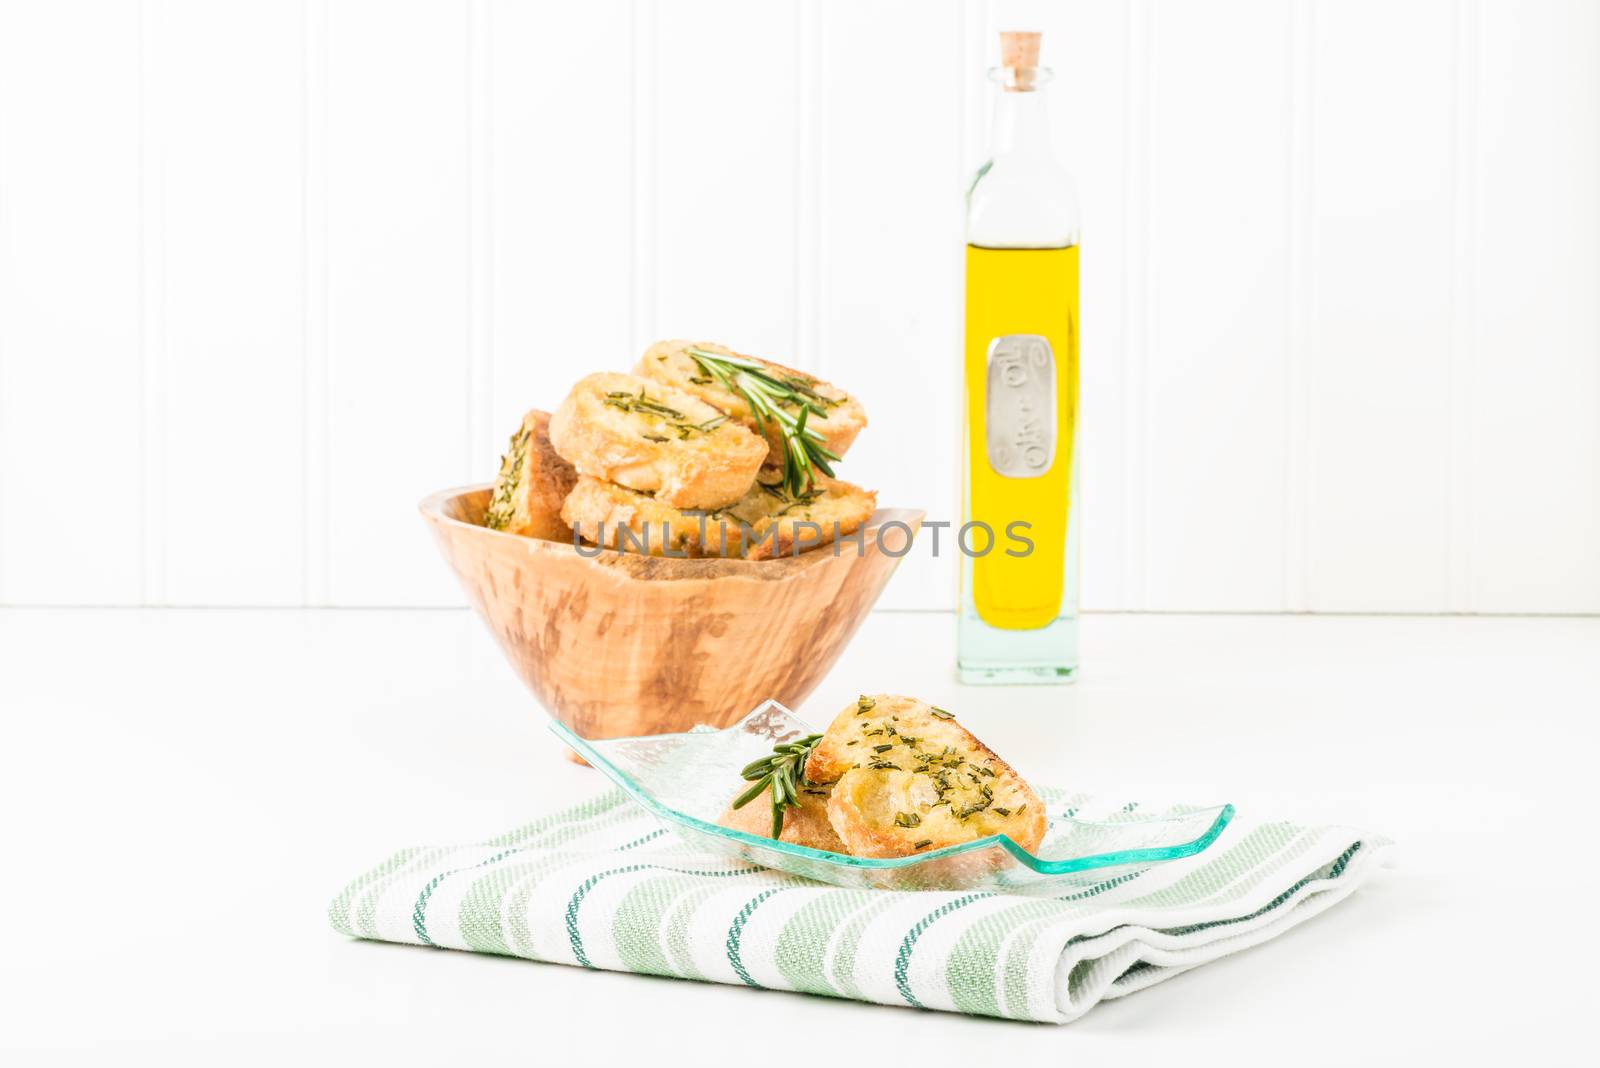 Rosemary and olive oil crostini on a plate.  Useful for a variety of food service marketing applications.